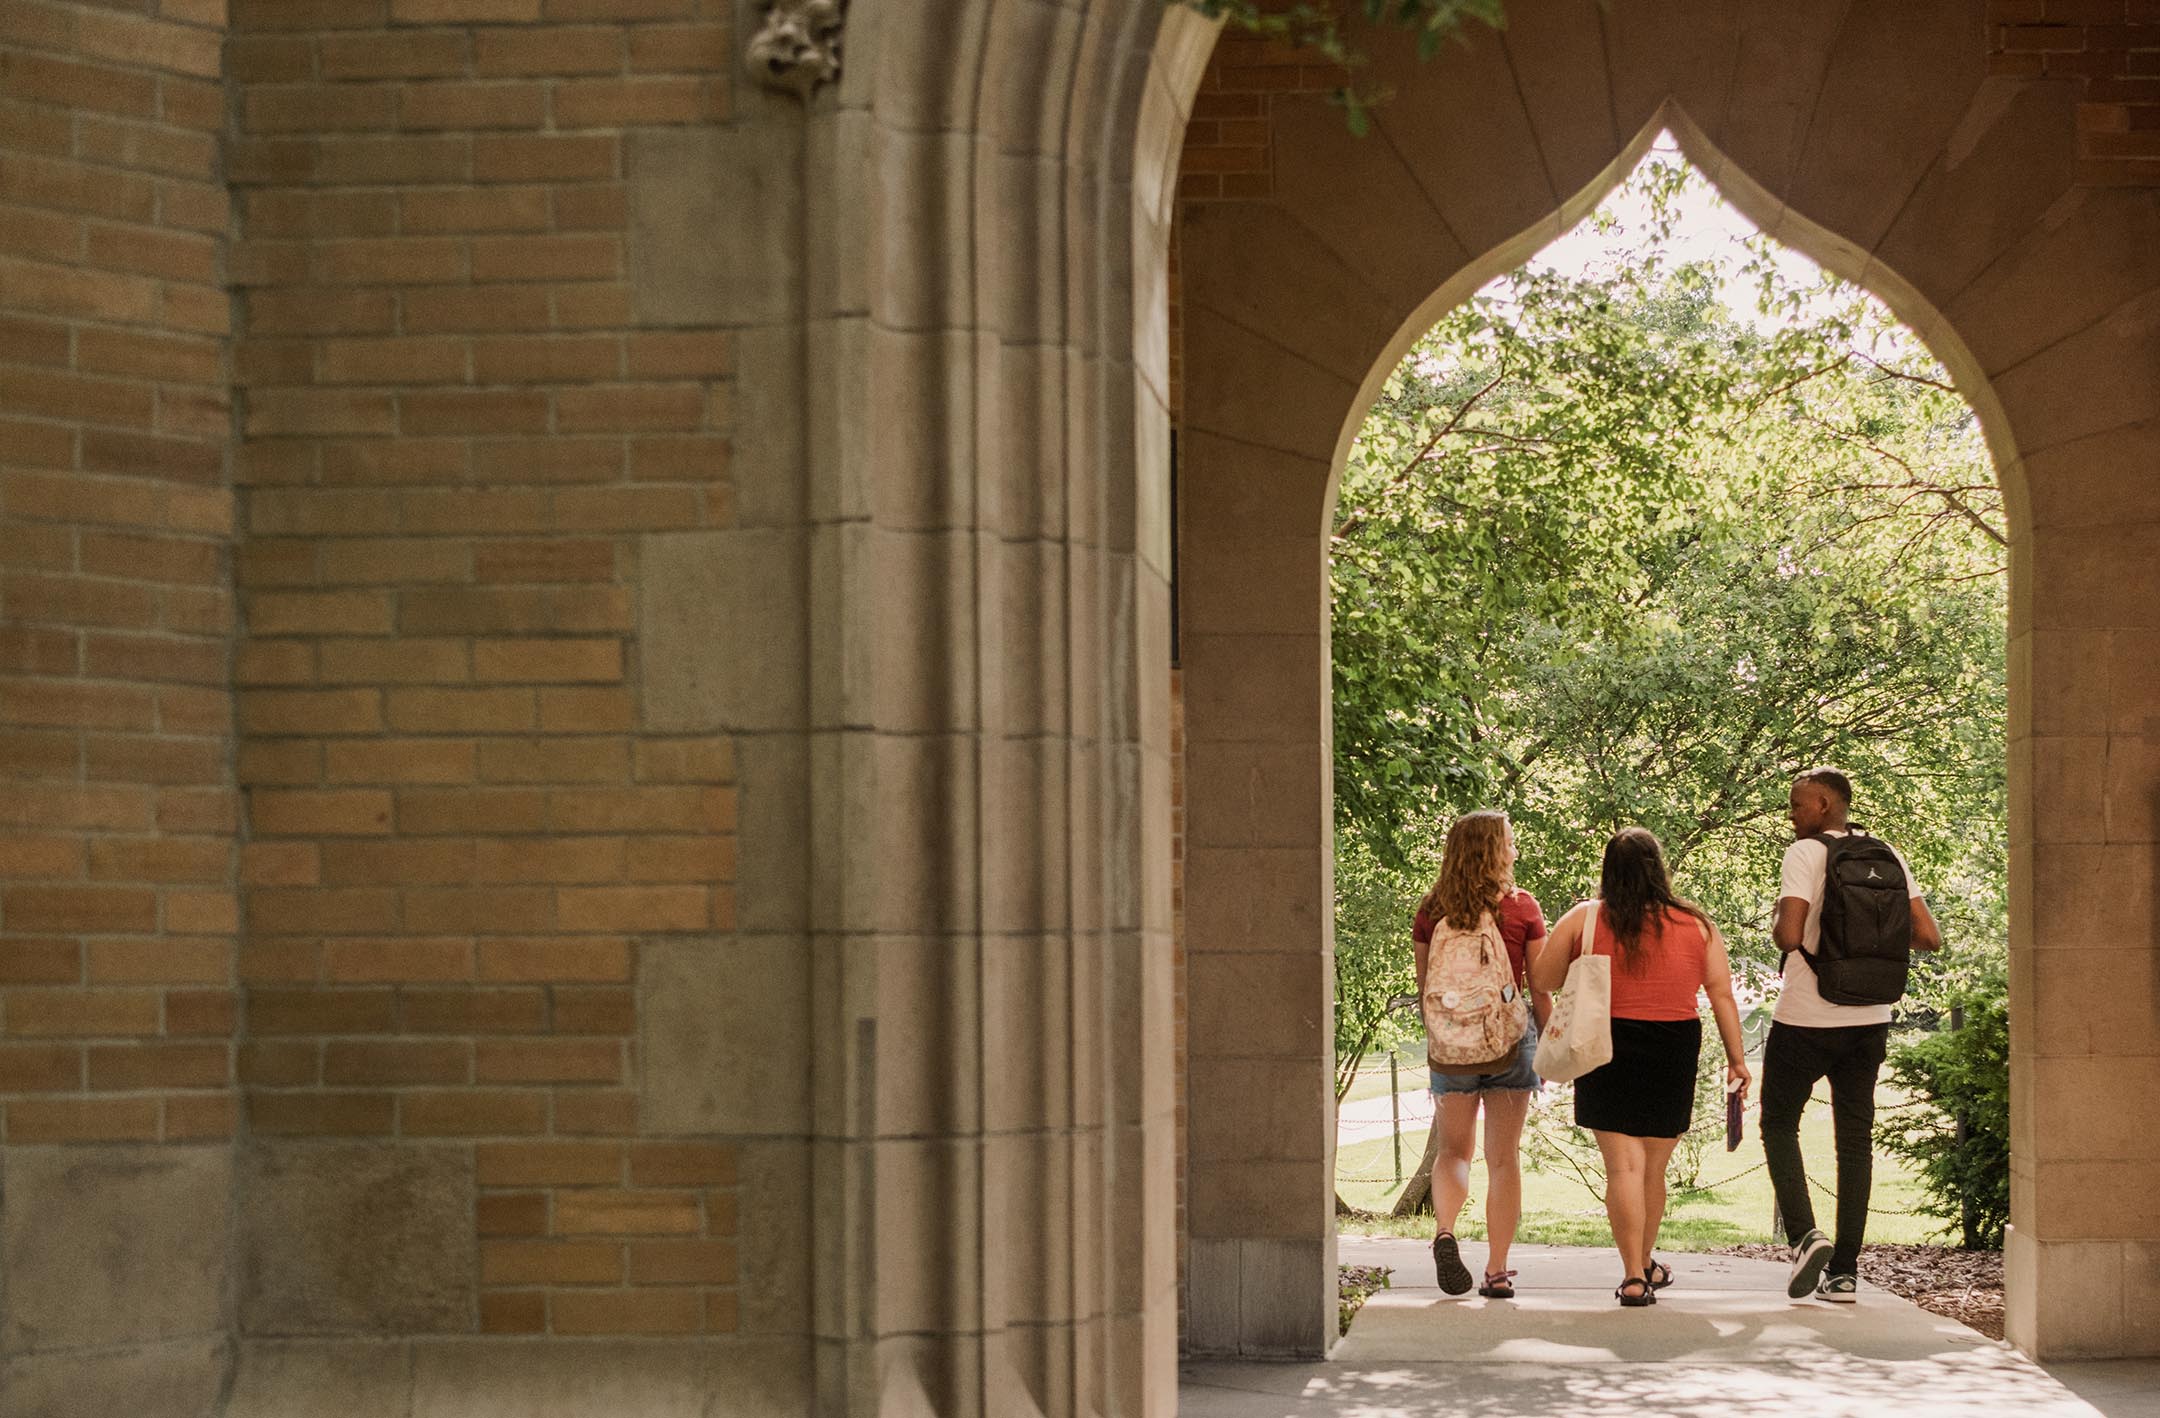 View from behind of three students walking through the Campanile's arched passageway